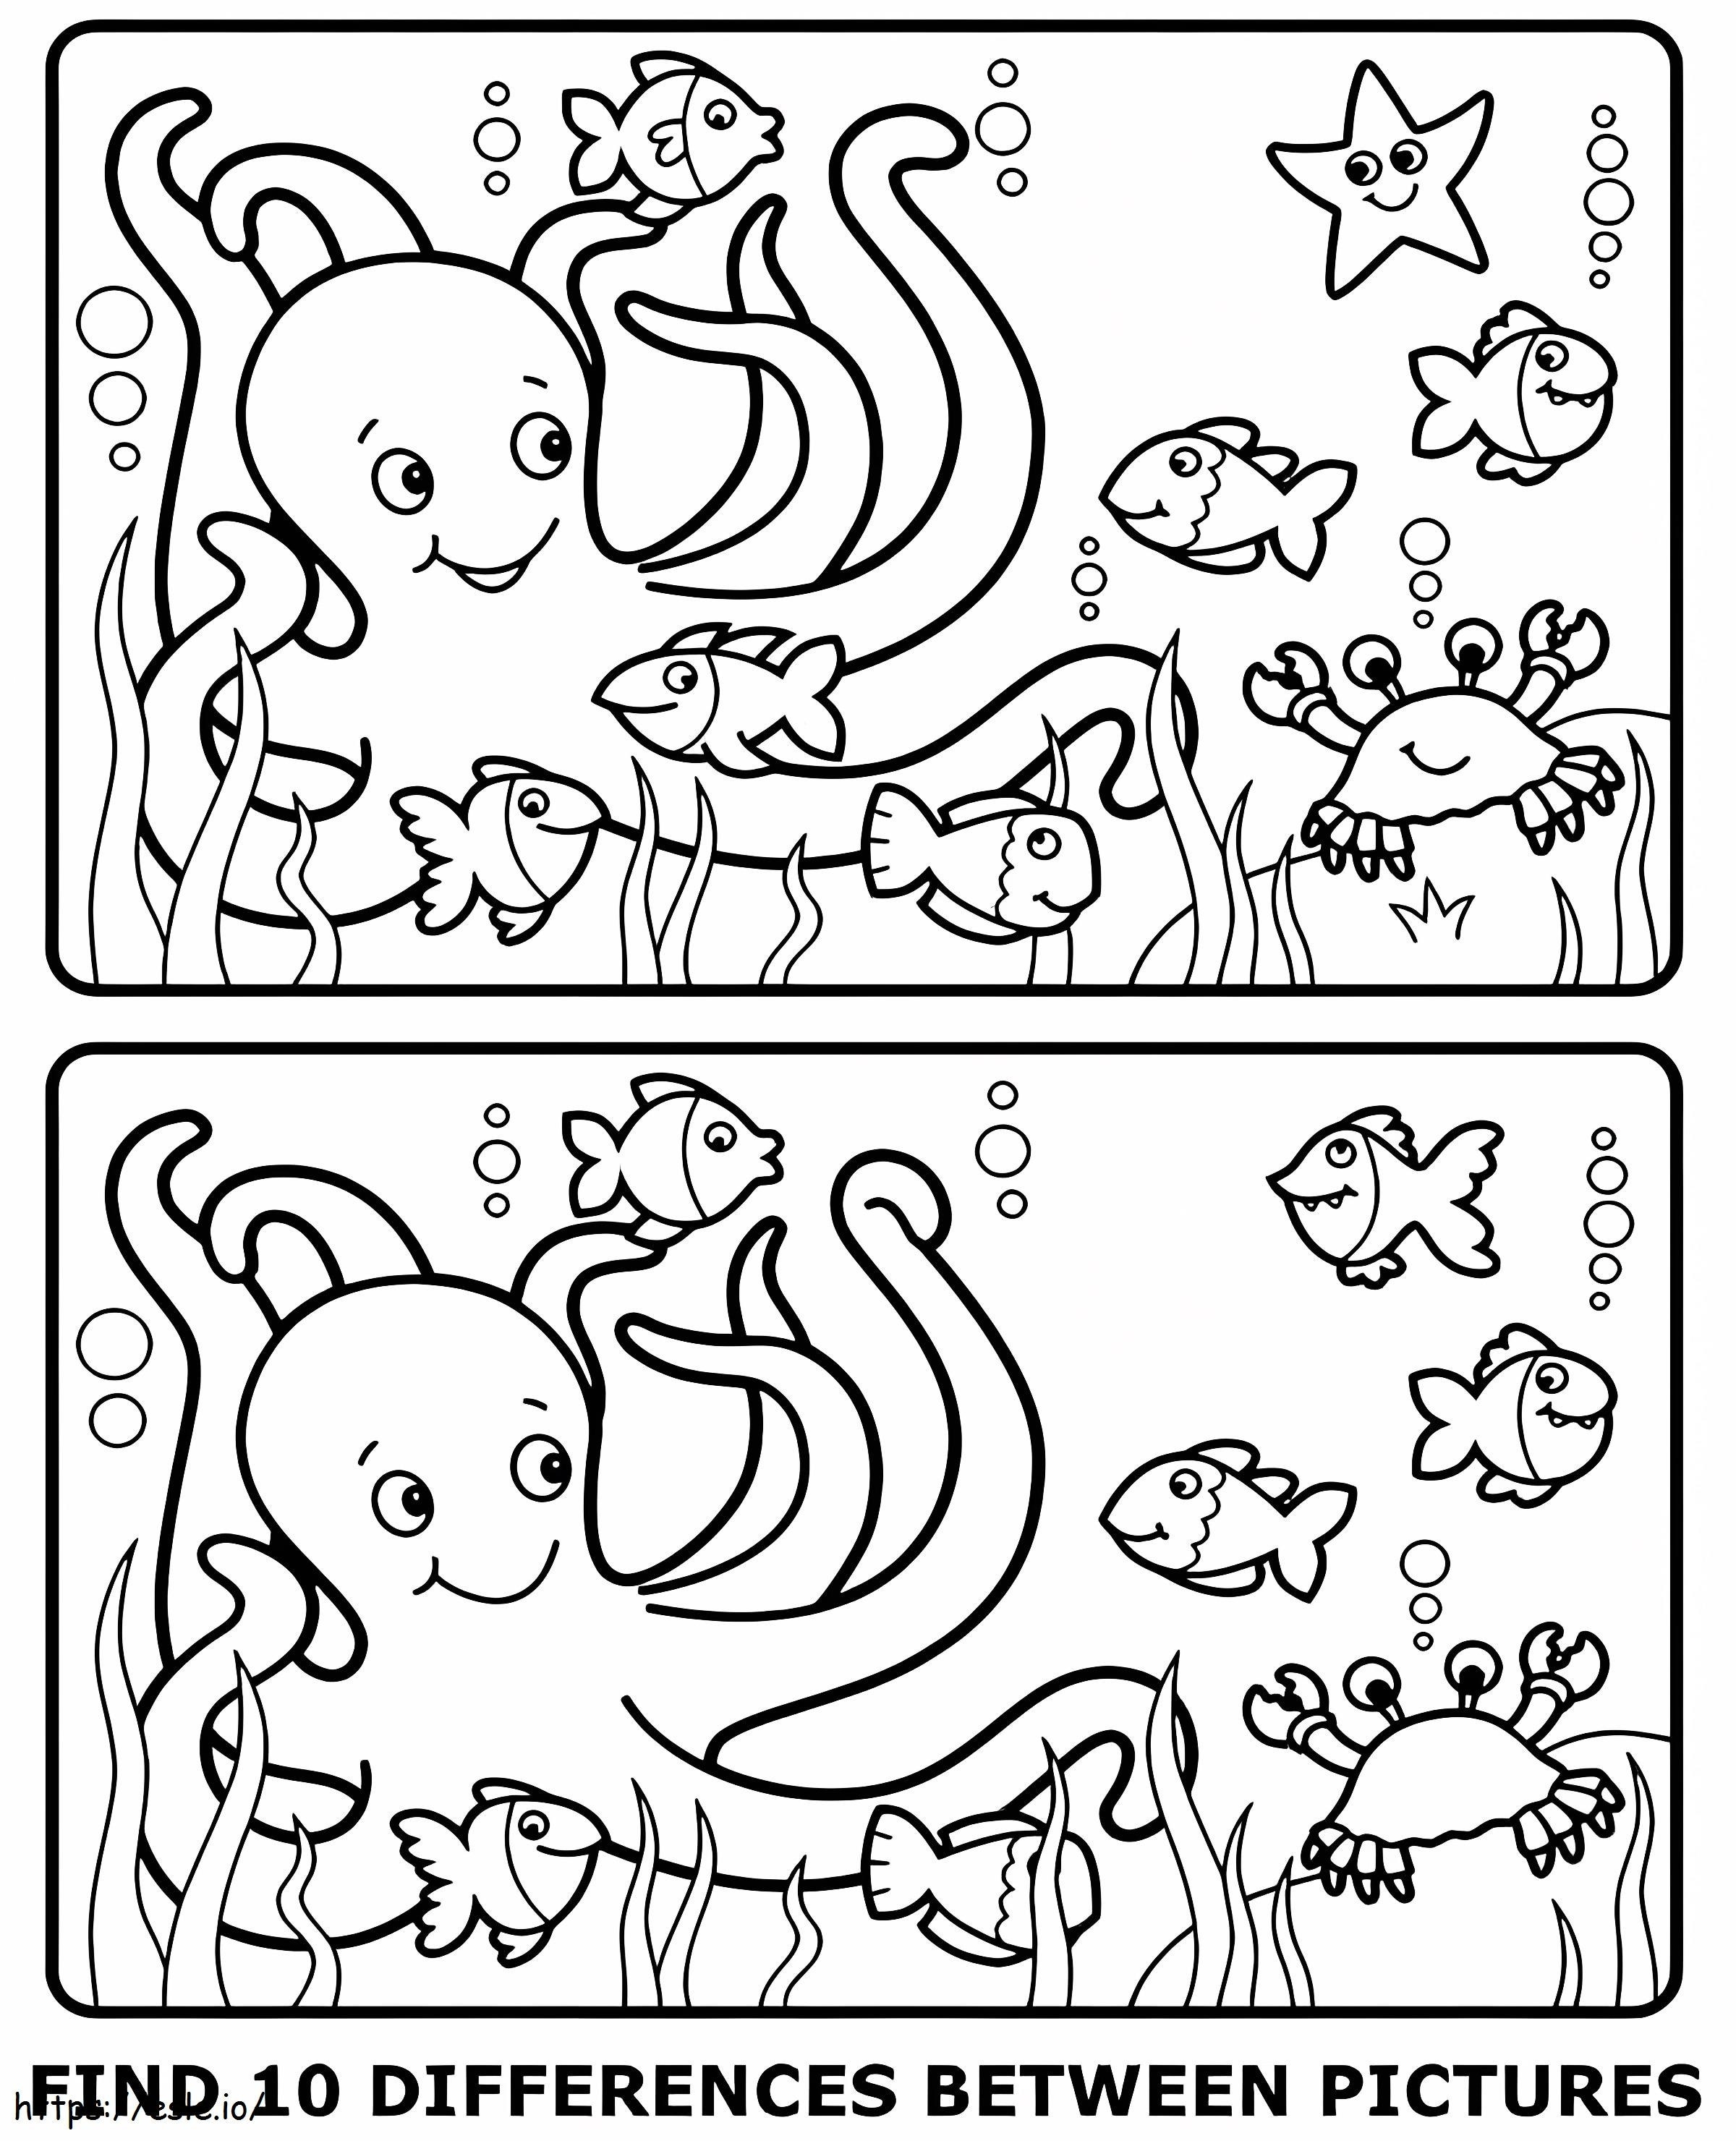 Find 10 Differences coloring page